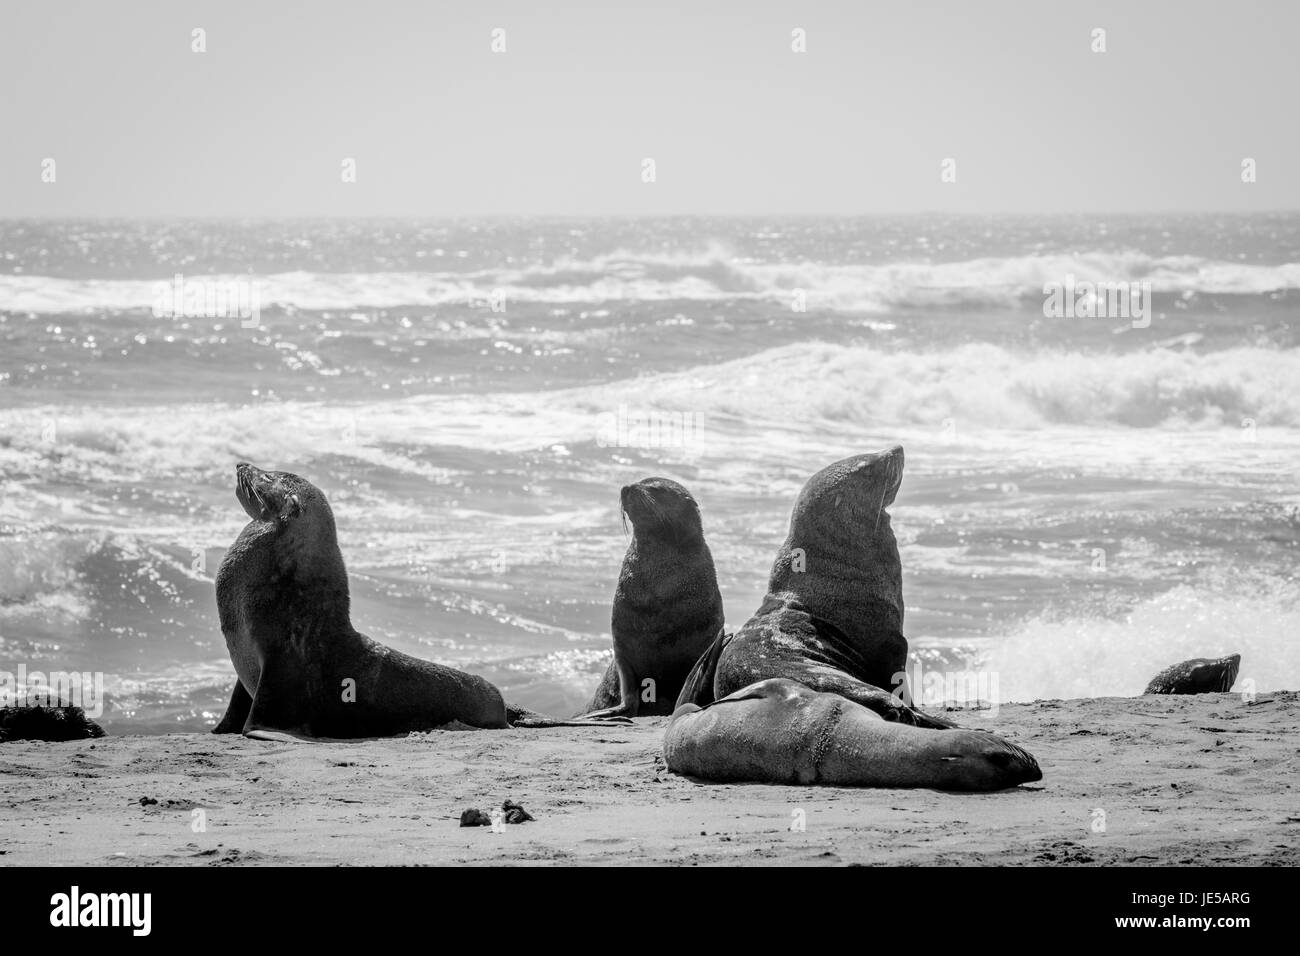 Cape fur seal namibia desert Black and White Stock Photos & Images - Alamy